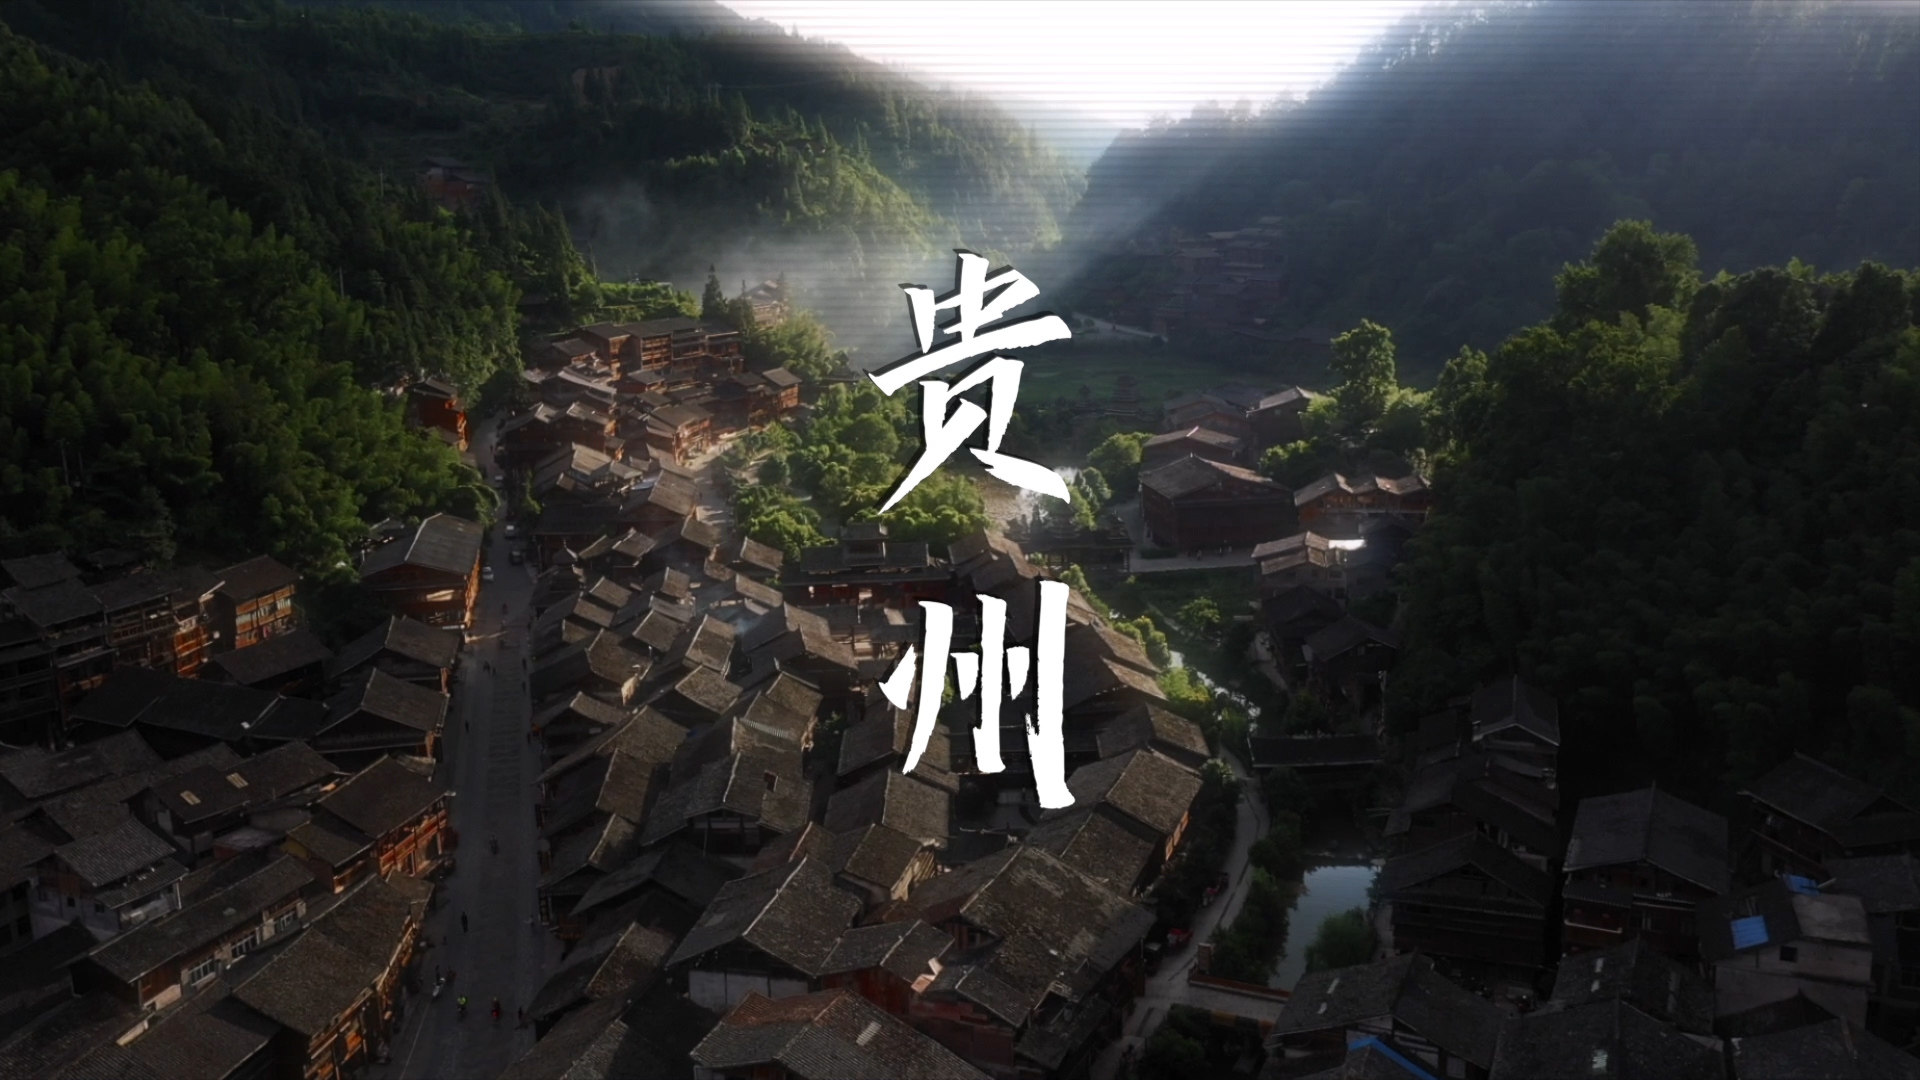 SkyPixel 6th Anniversary Contest Nominated Entries 贵州旅拍-神隐黔贵，带你走进贵州的神仙境地